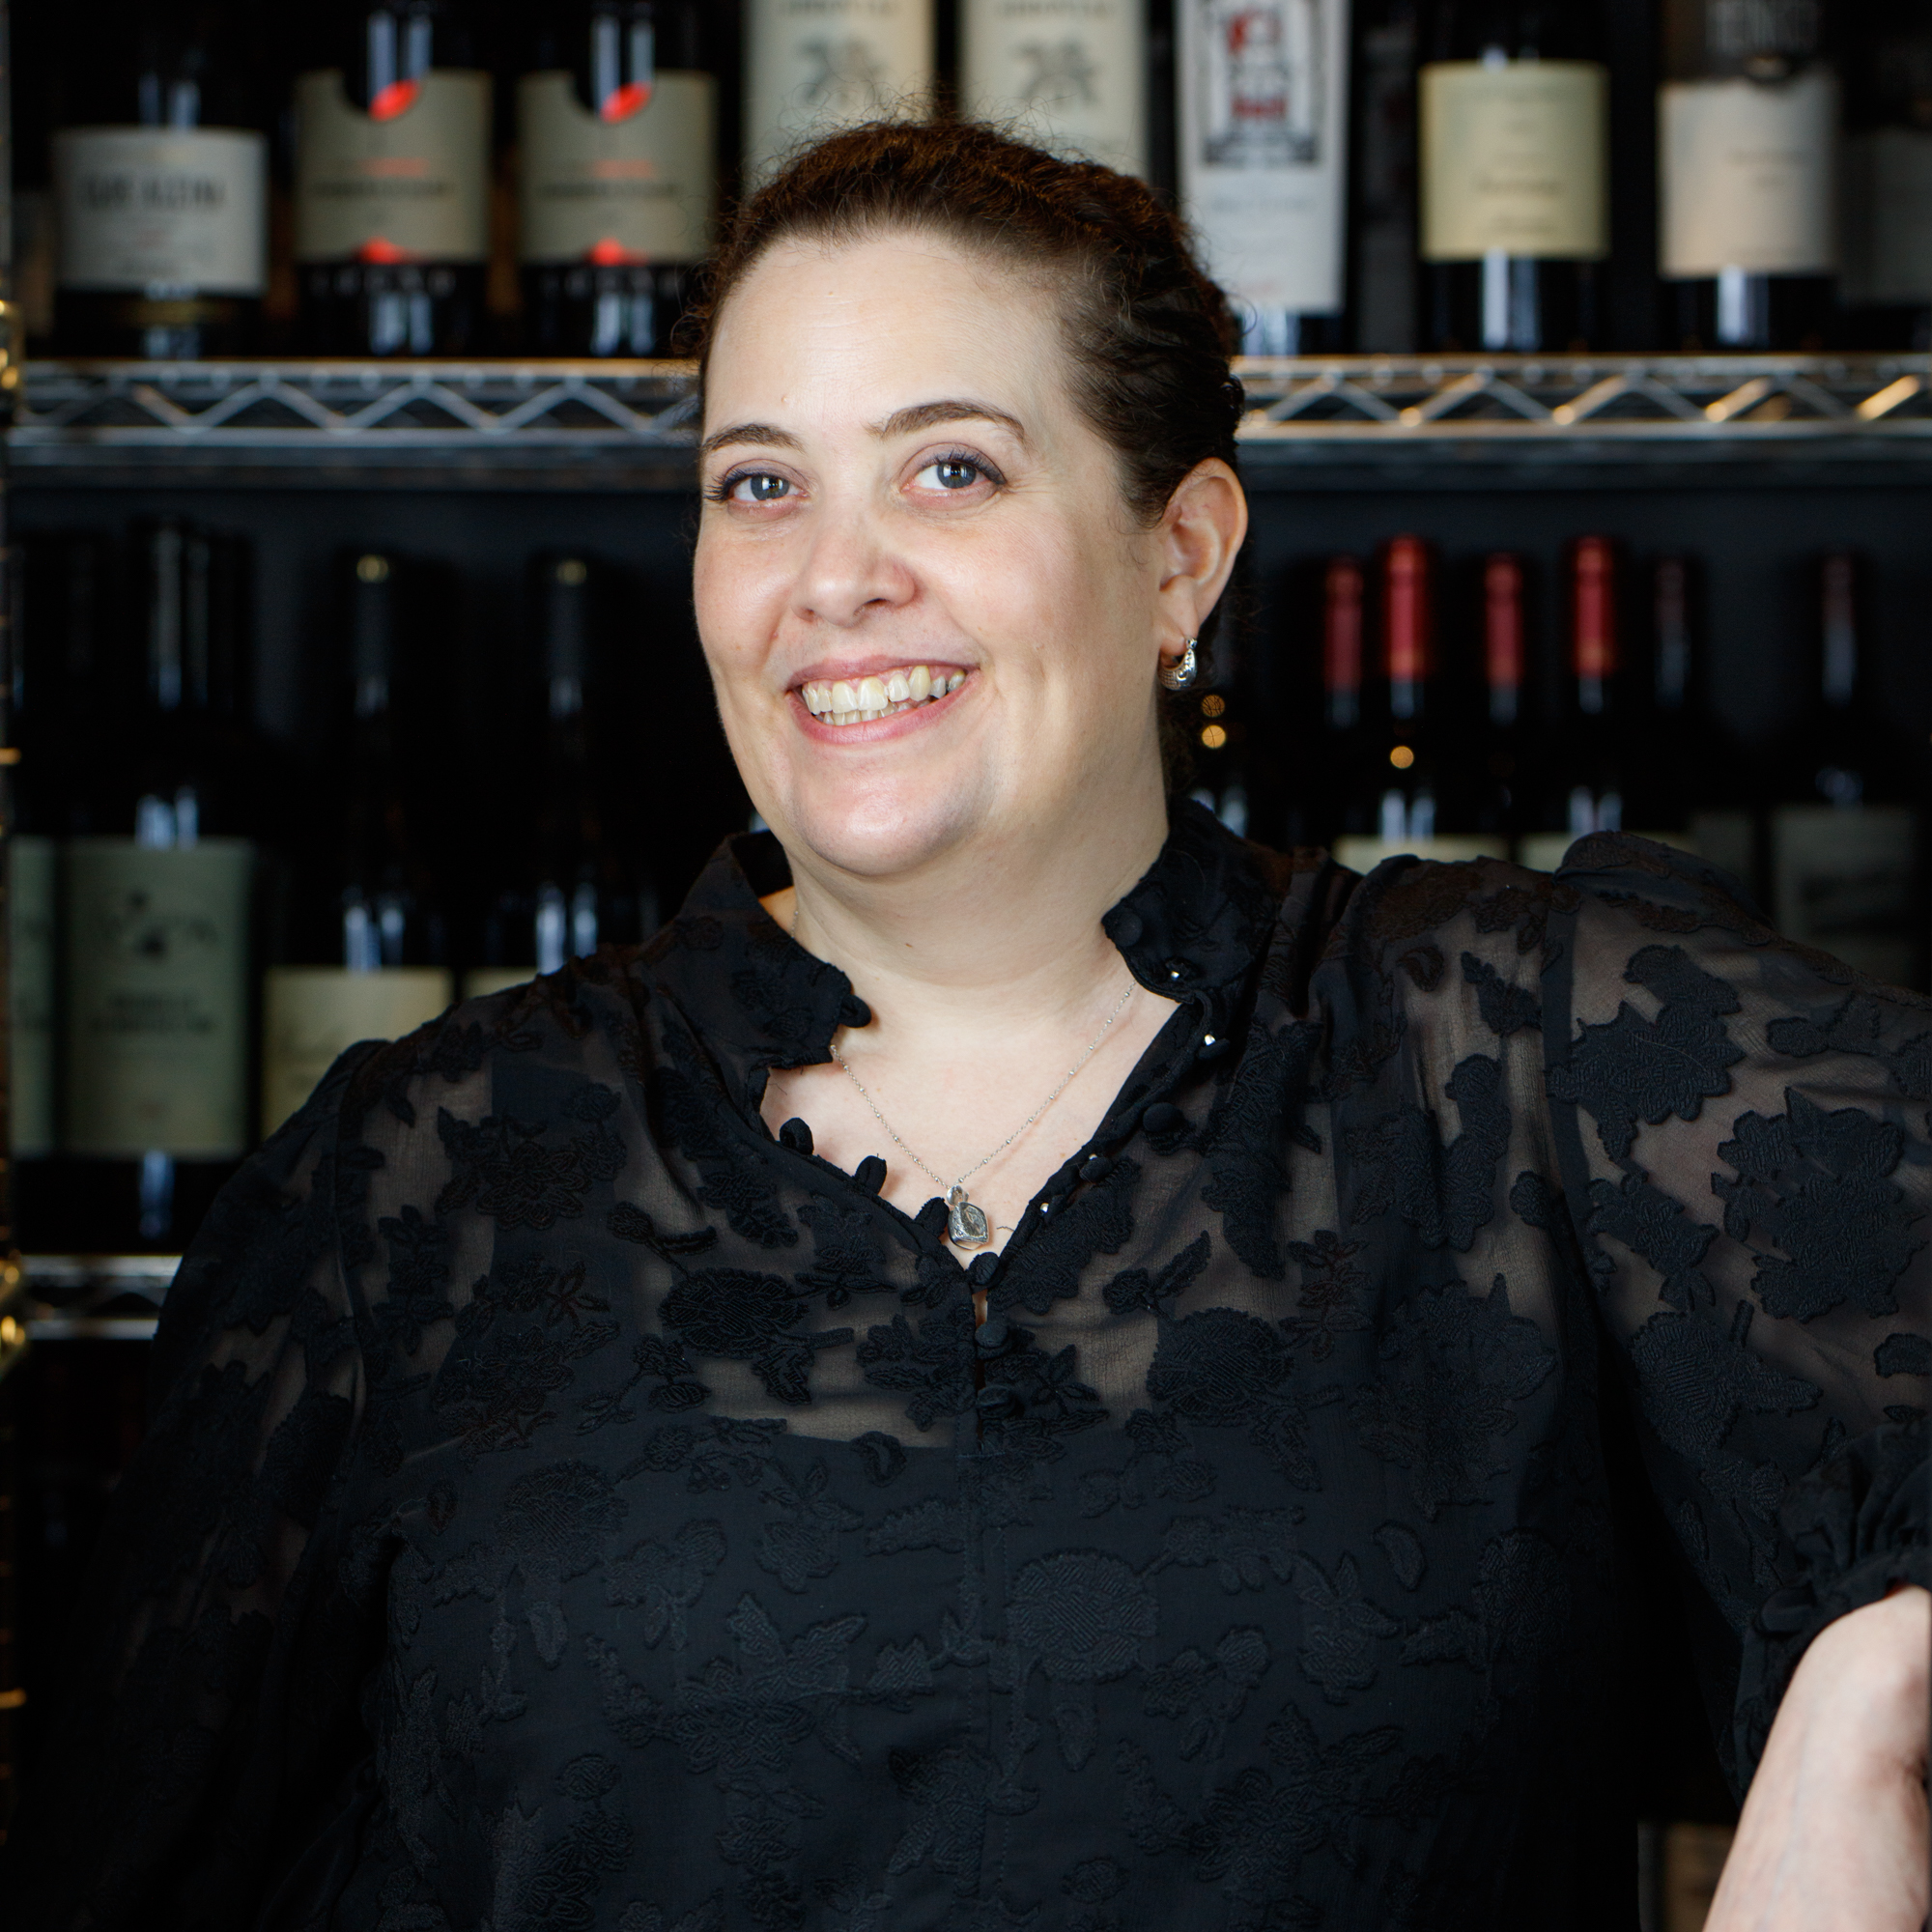 Alcove Boston. Restaurant at Lovejoy Wharf, Boston MA. Charlestown, North End. Tara Orkofsky, Assistant Wine Director